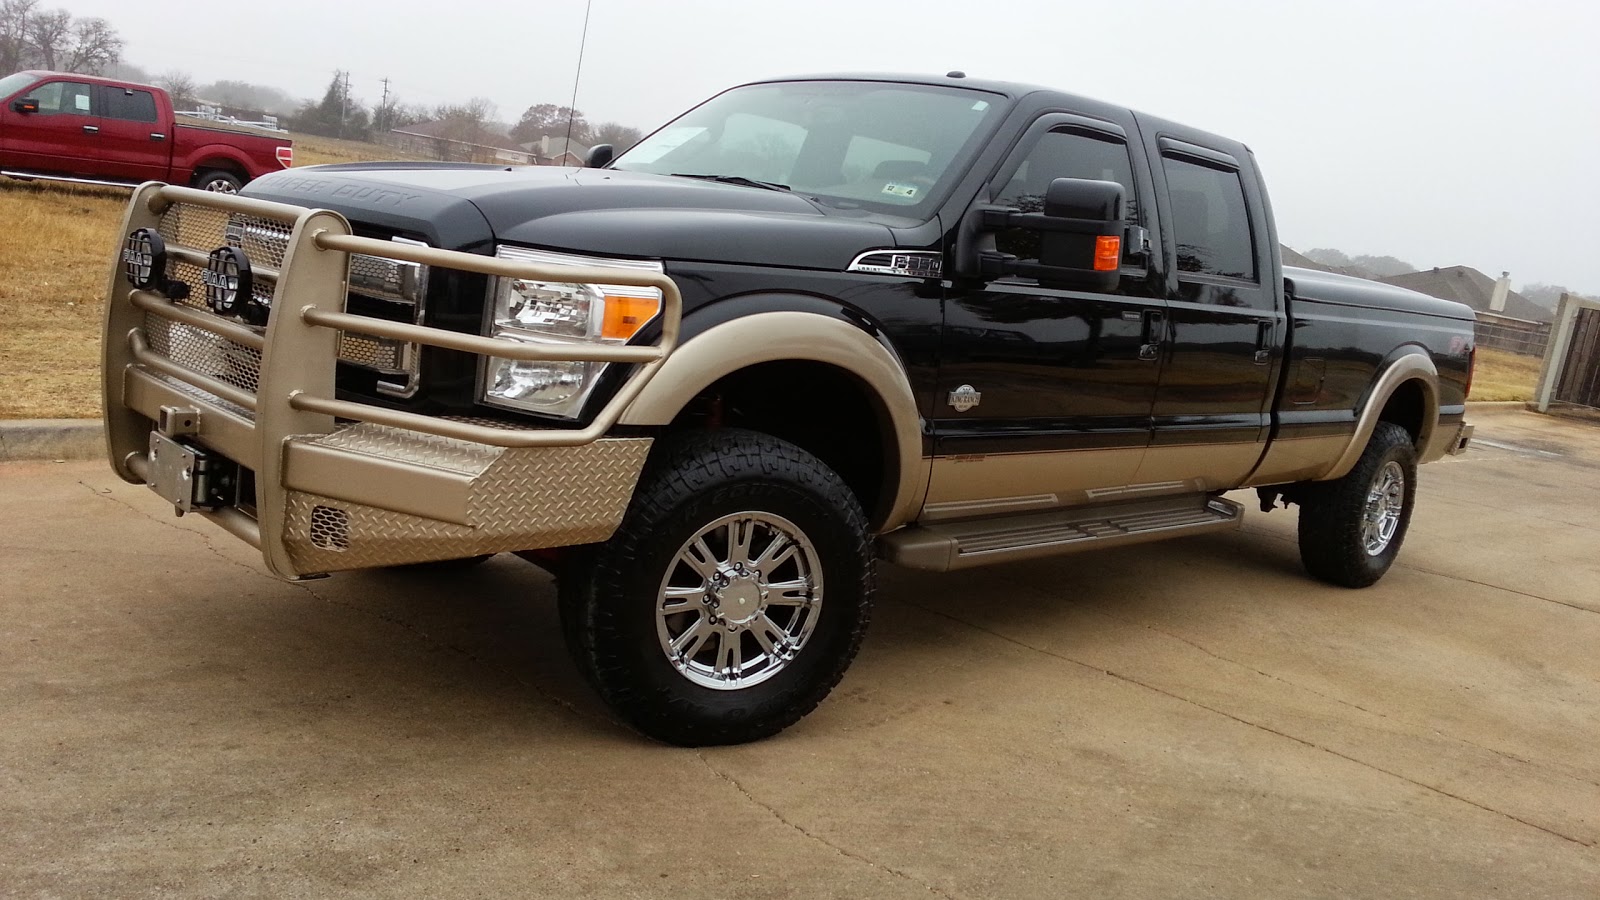 Ford king ranch trucks for sale in texas #8